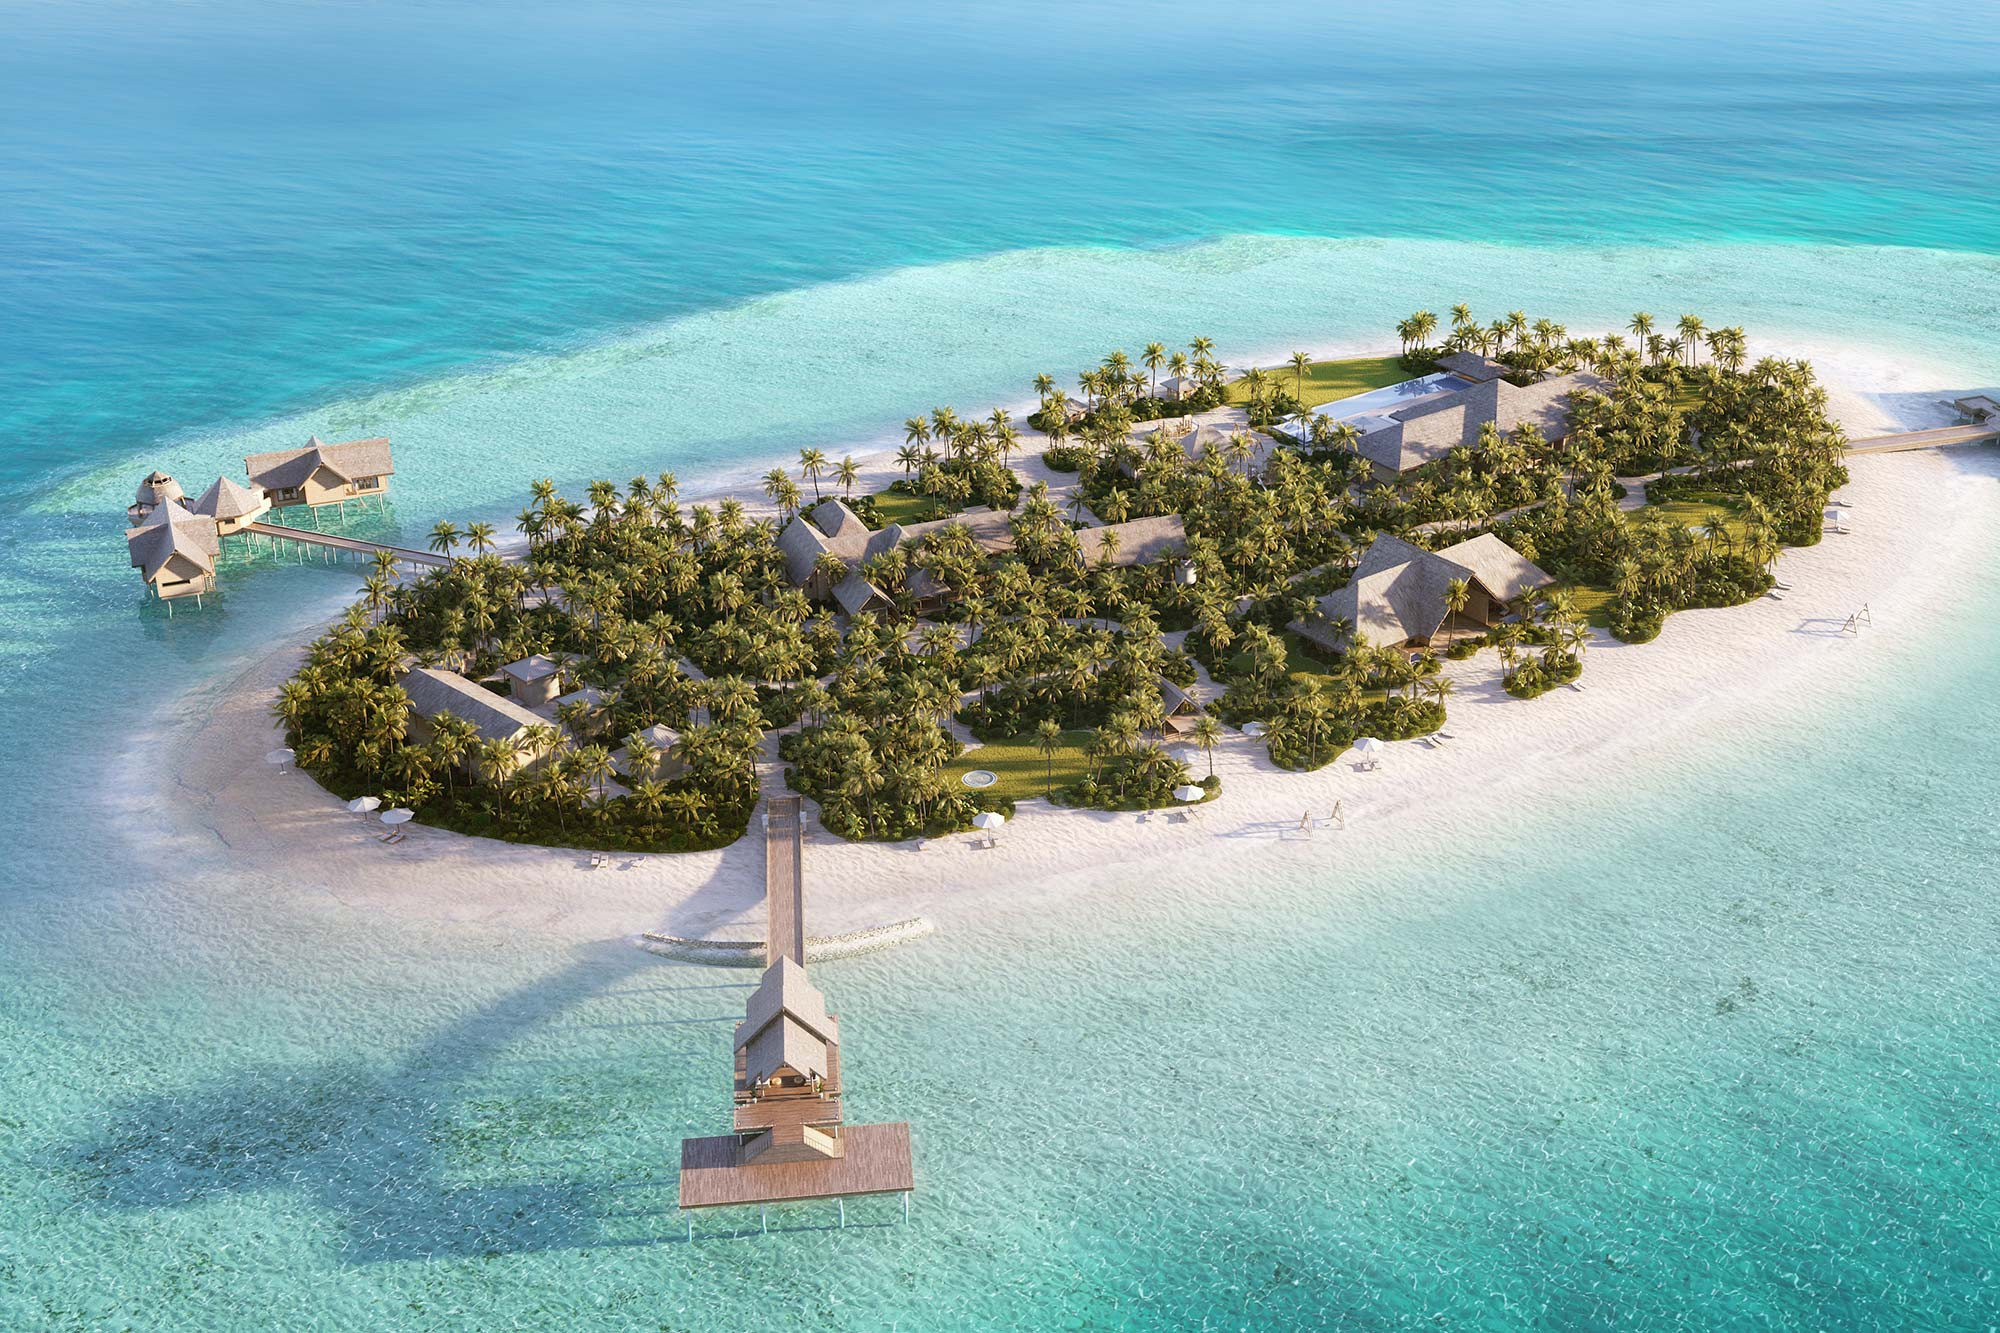 Waldorf Astoria Maldives Ithaafushi Welcomes You to a Day Filled with Endless Ocean Views